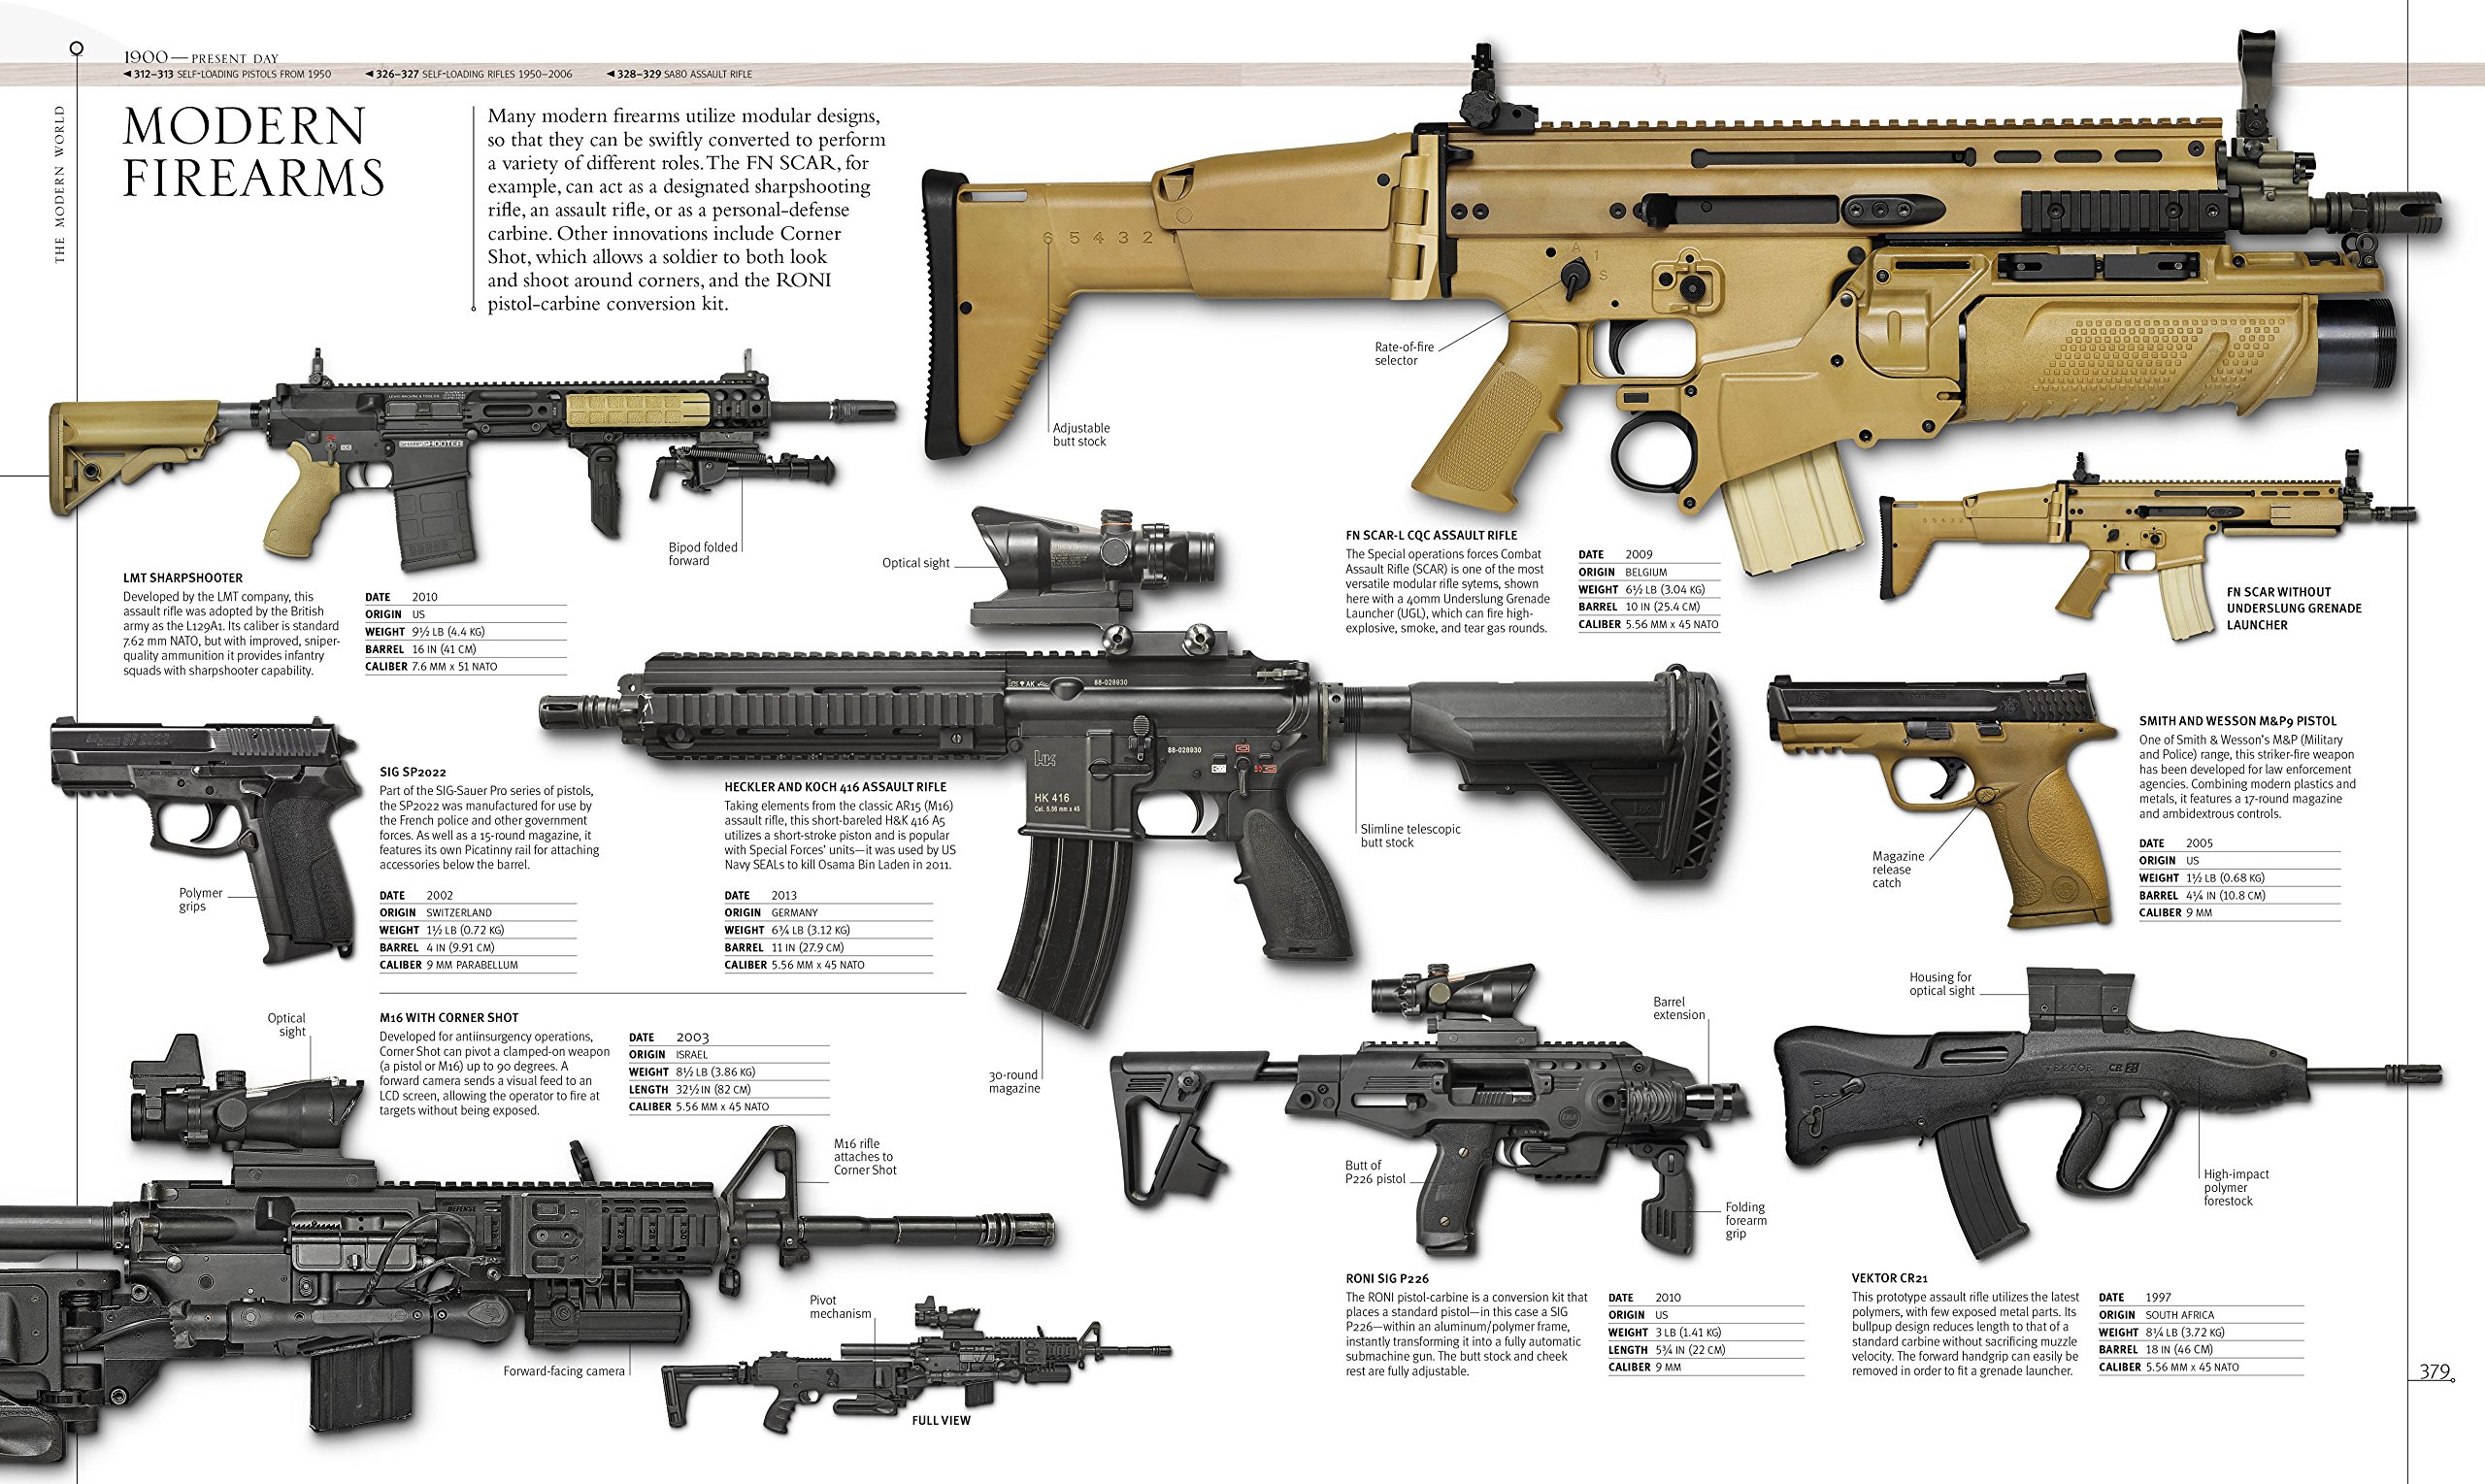 Amazon.com: Weapon: A Visual History of Arms and Armor ...